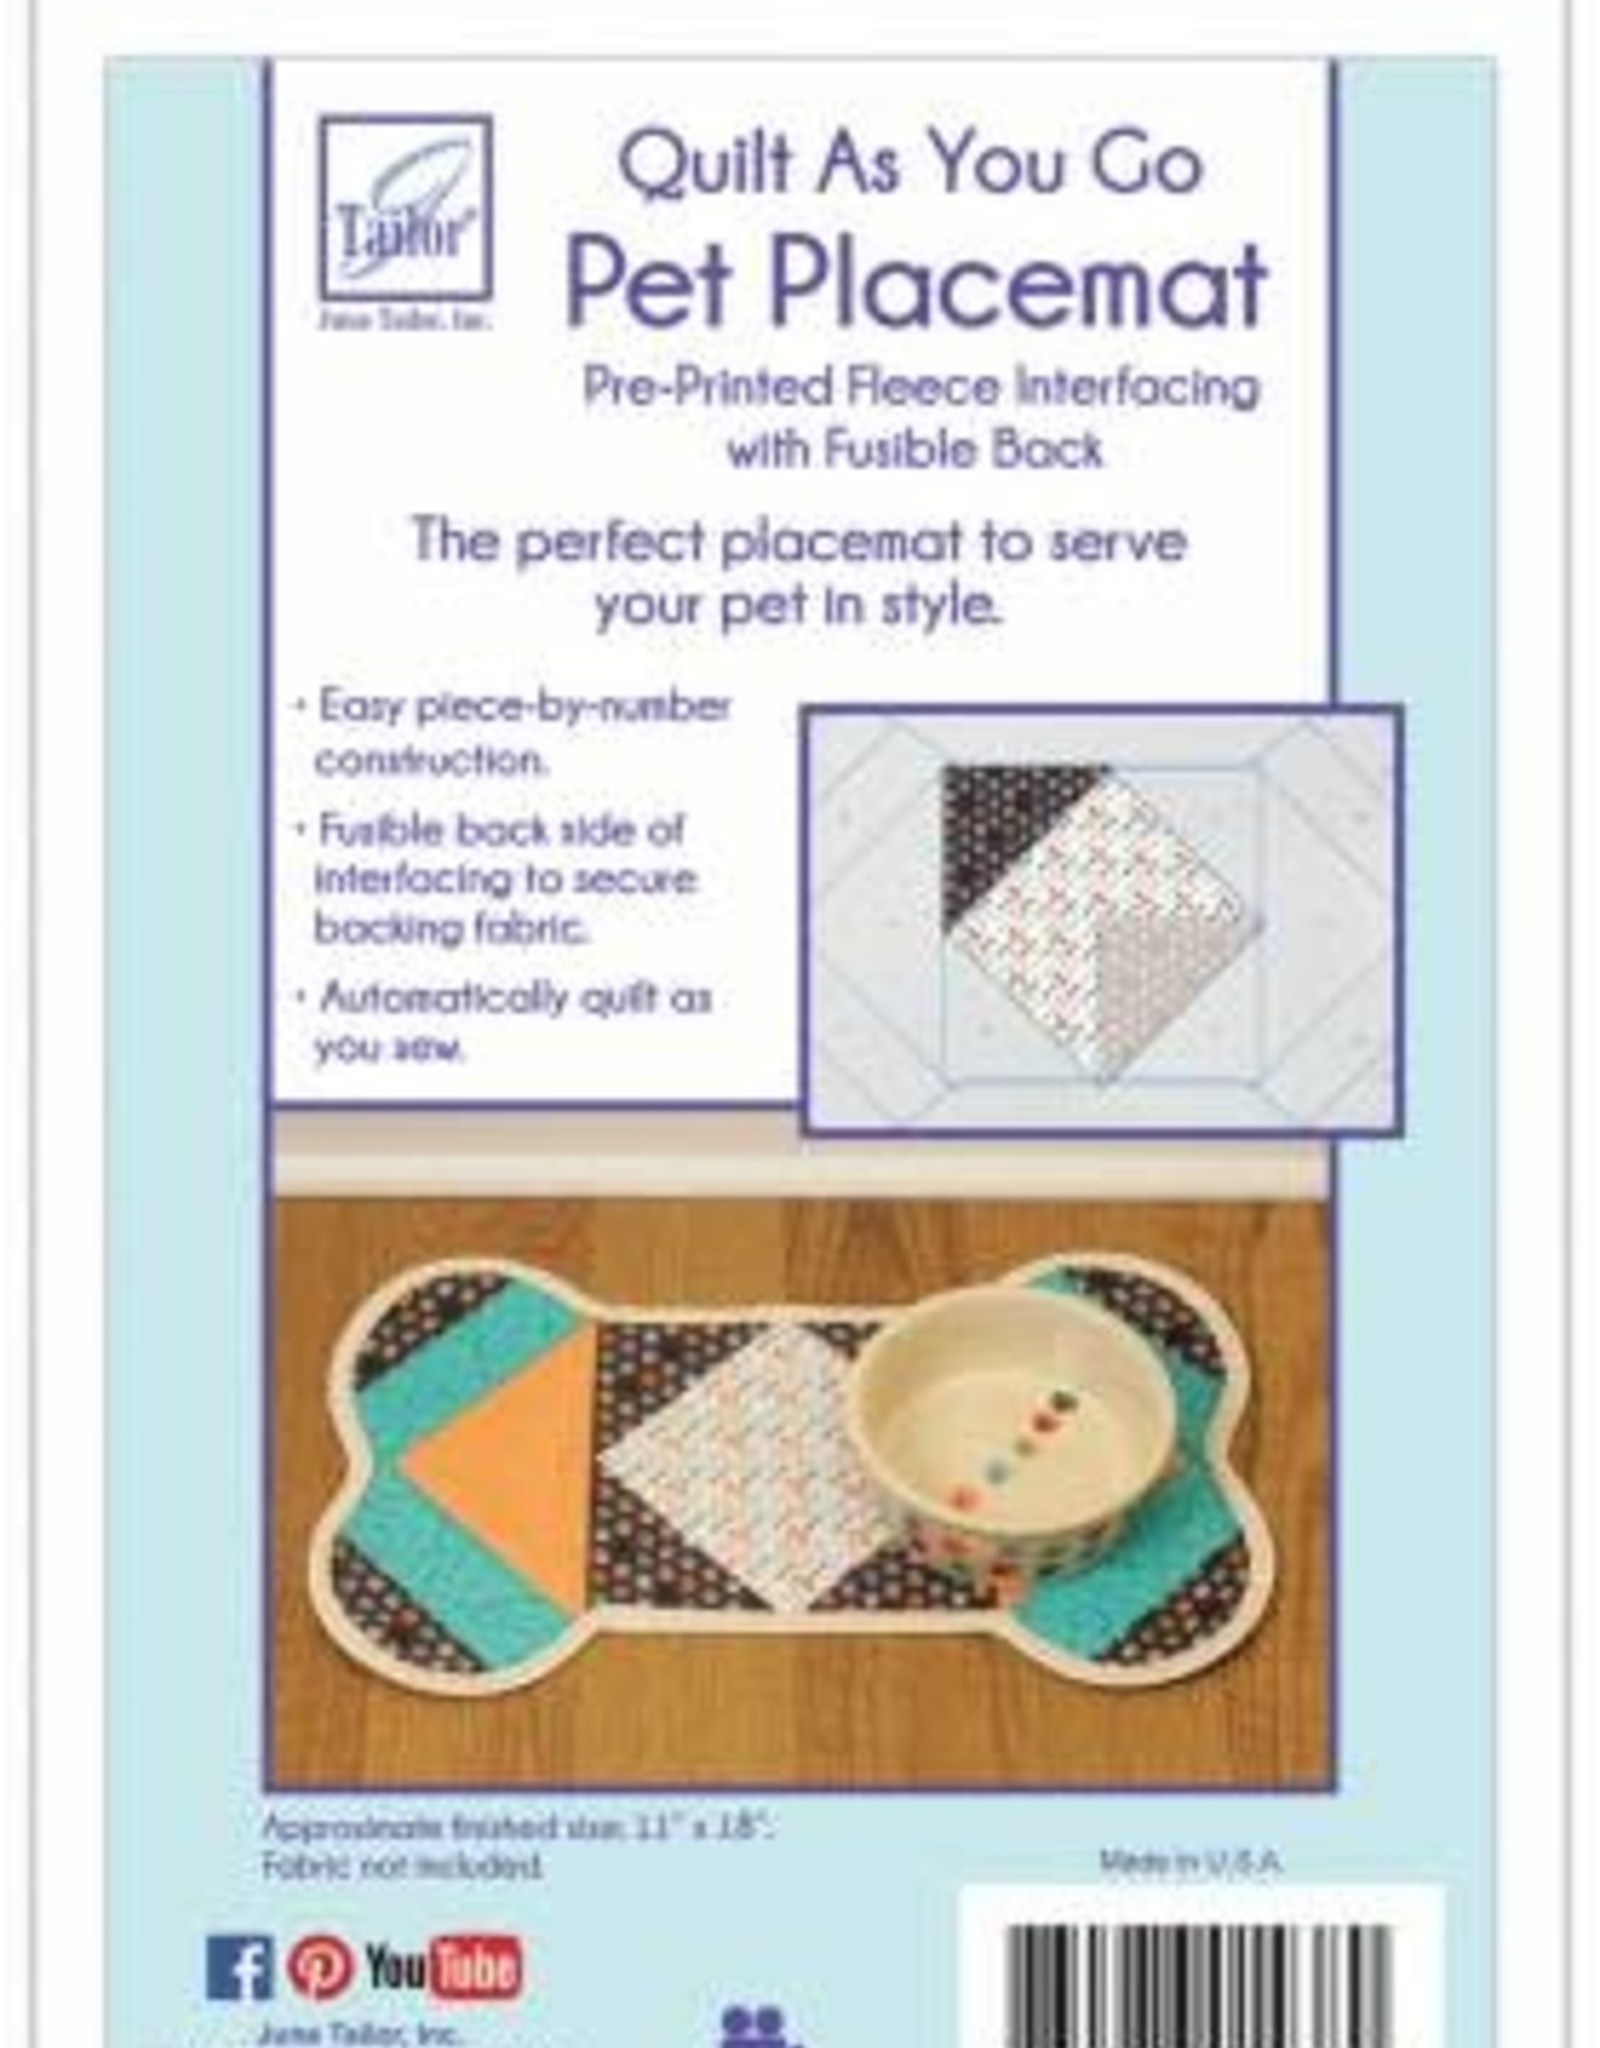 Quilt as you go placemat - Dog with Fabric